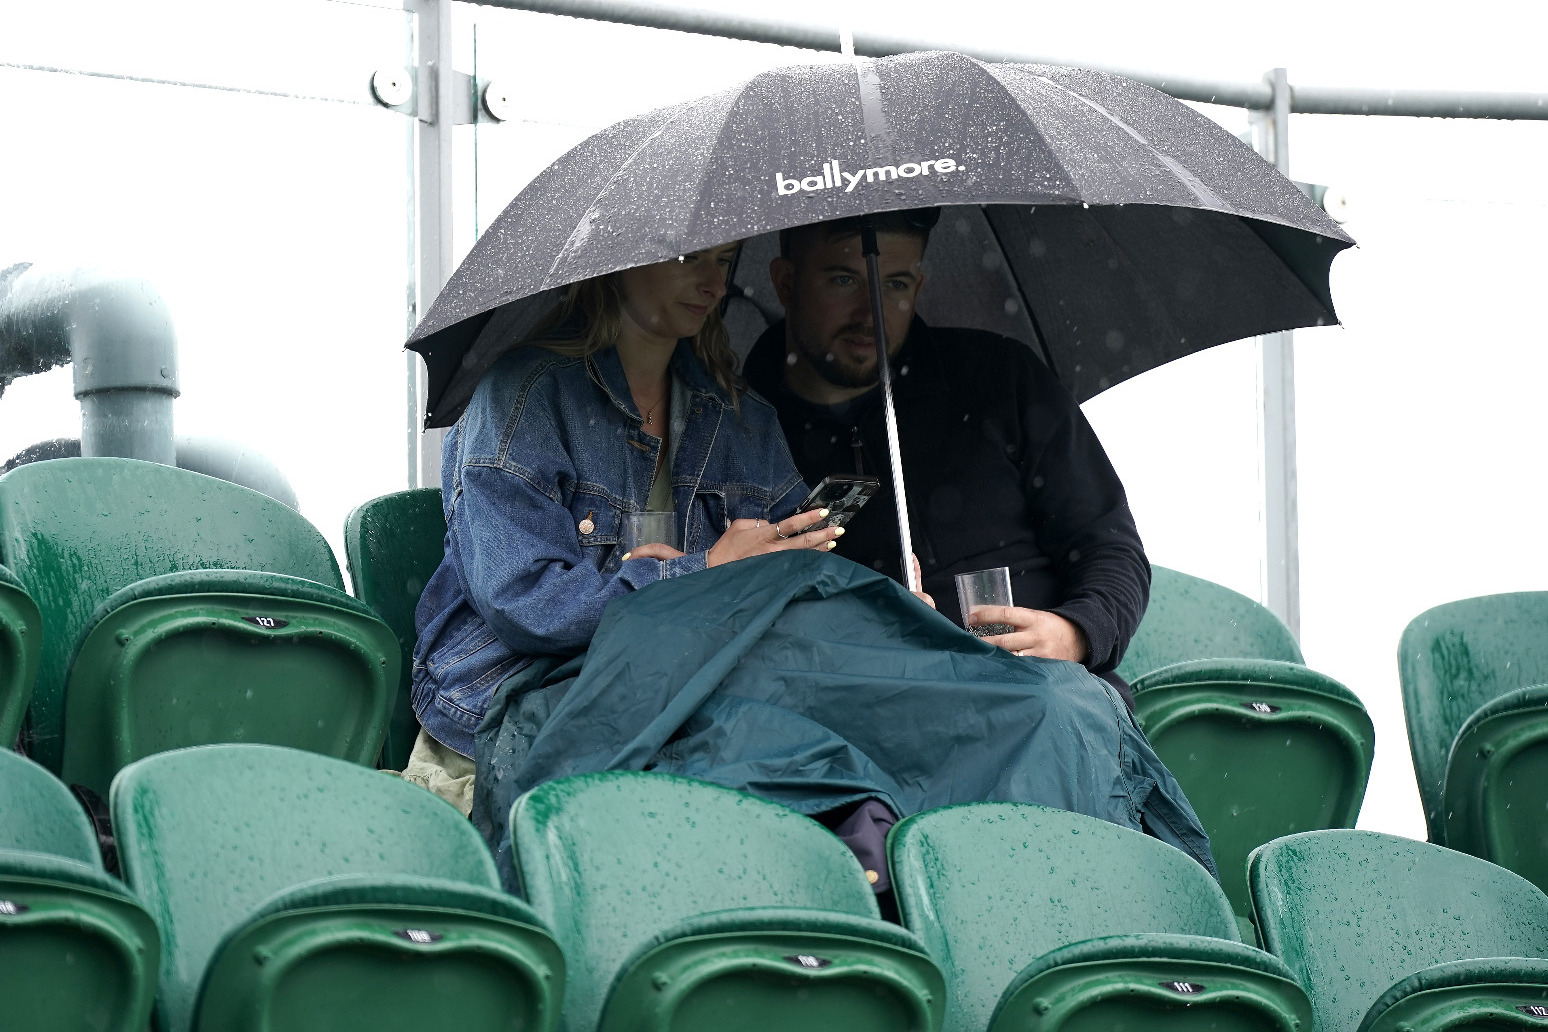 Rain makes early appearance as Wimbledon gets under way 